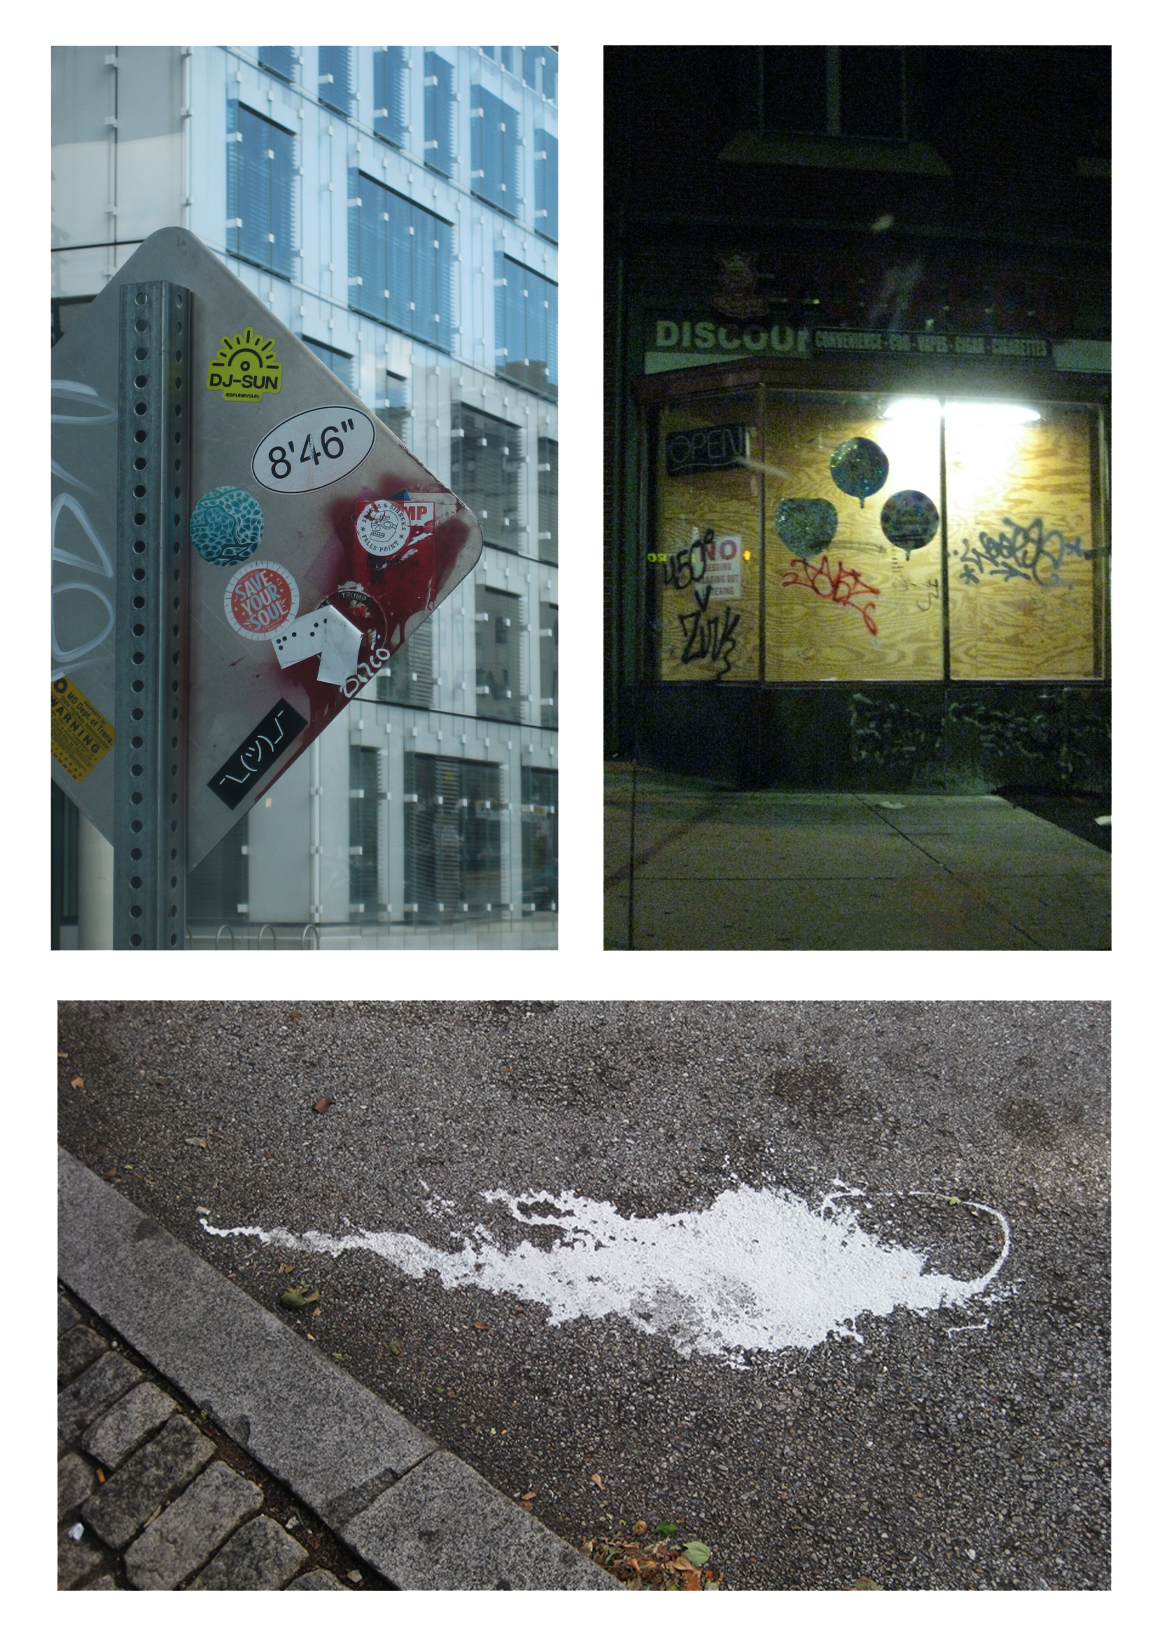 collage of three images, one of a stickered street sign, one of a store window at night, one of a paint splotch on pavement.